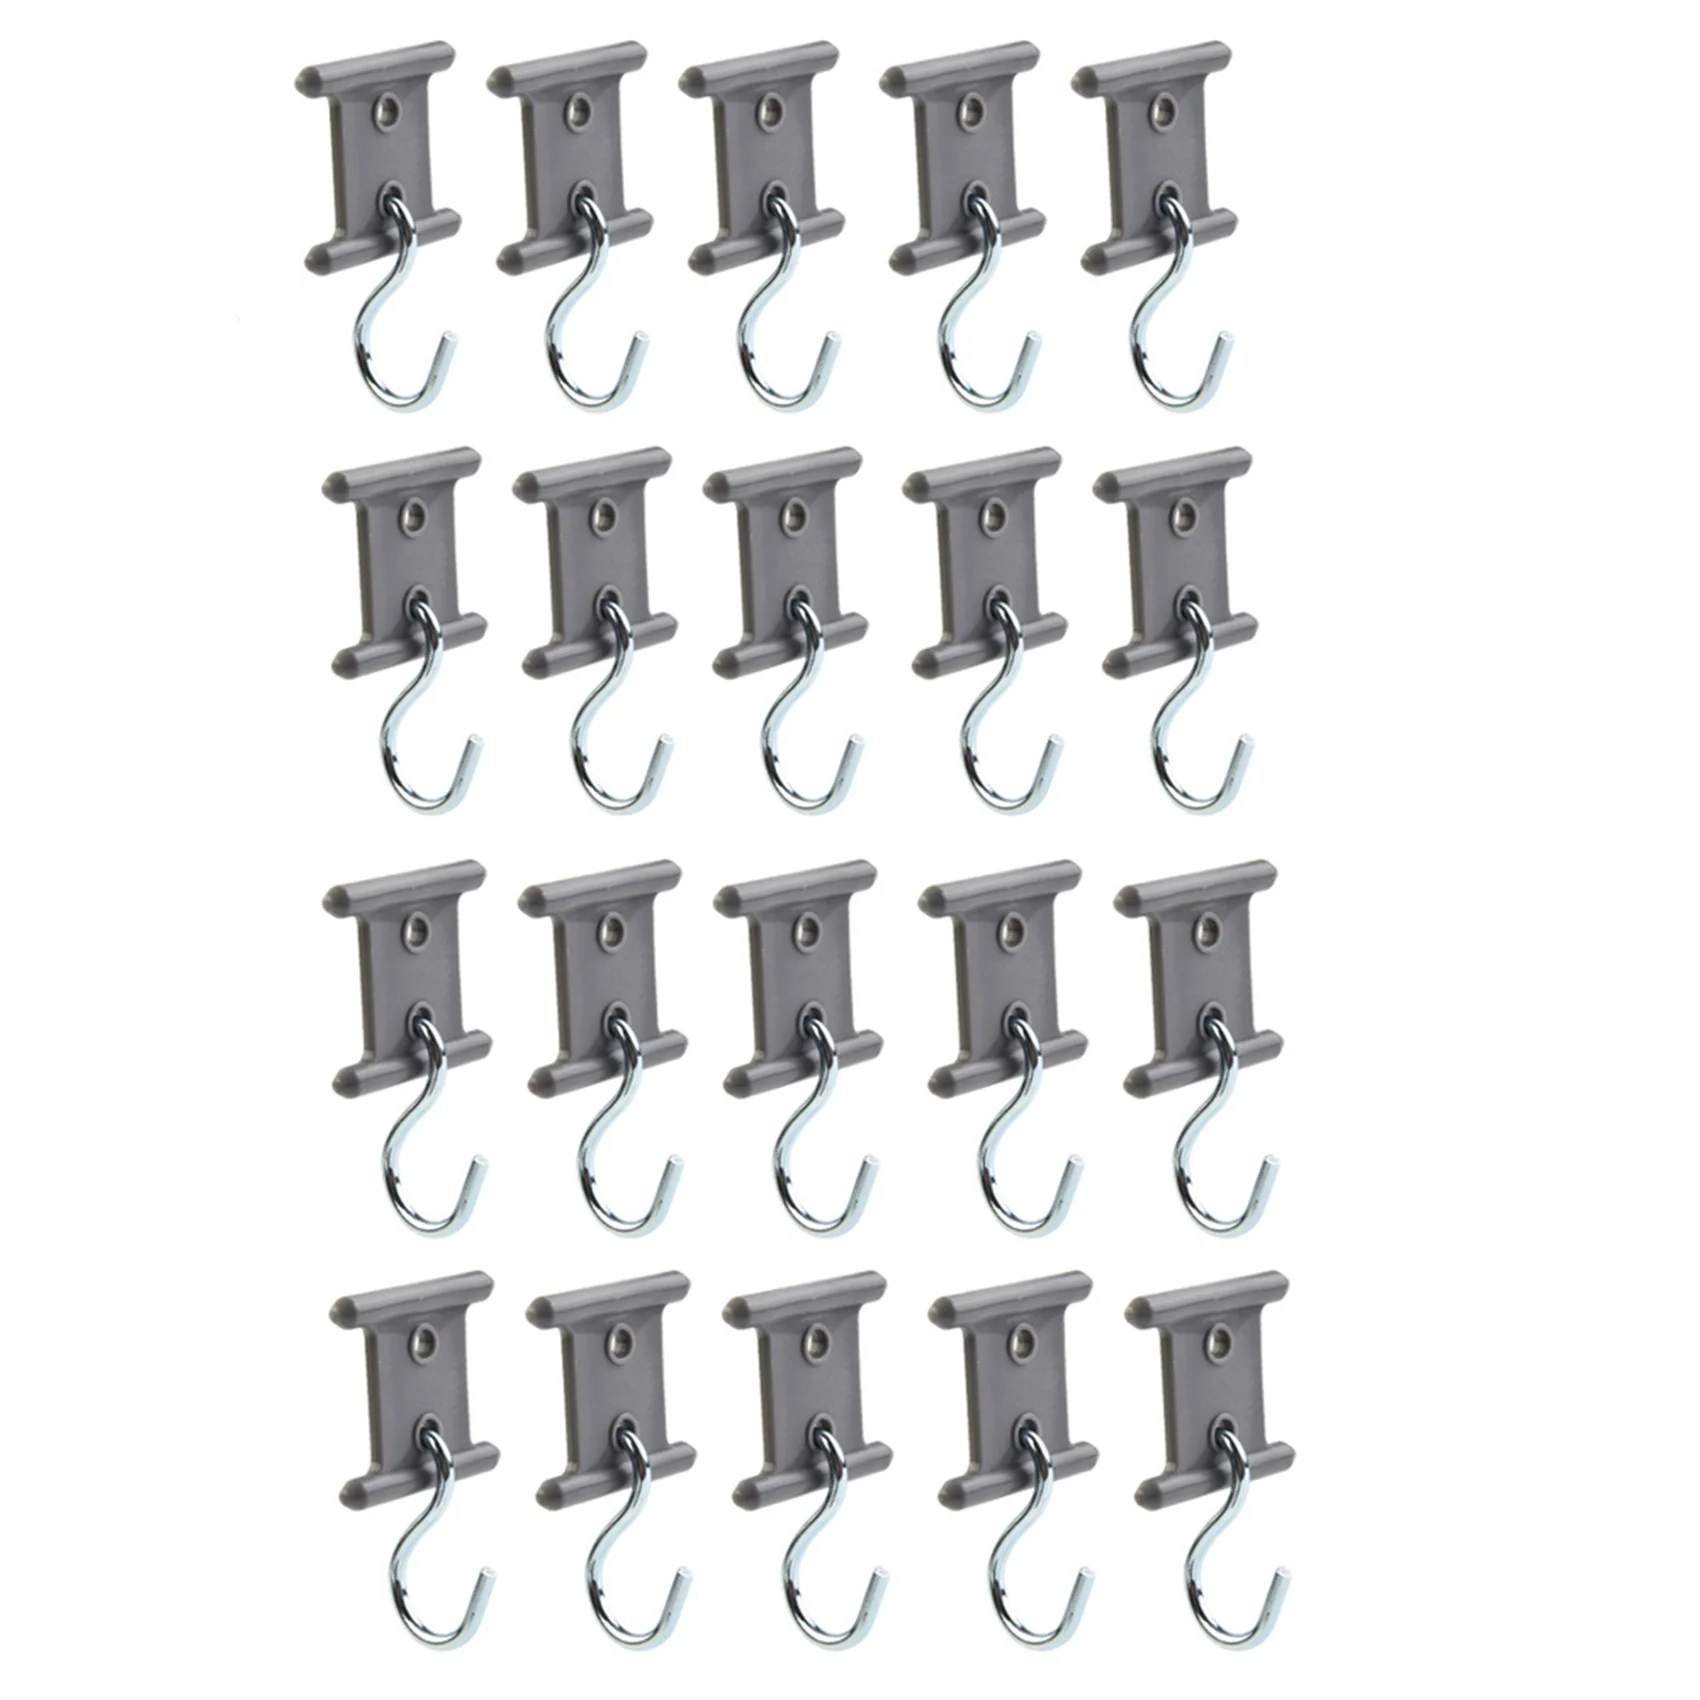 

20PC Camping Awning Hook RV Awning Hangers Hooks RV Party Light Hangers for Christmas Party Caravan Travel Trailer Grey